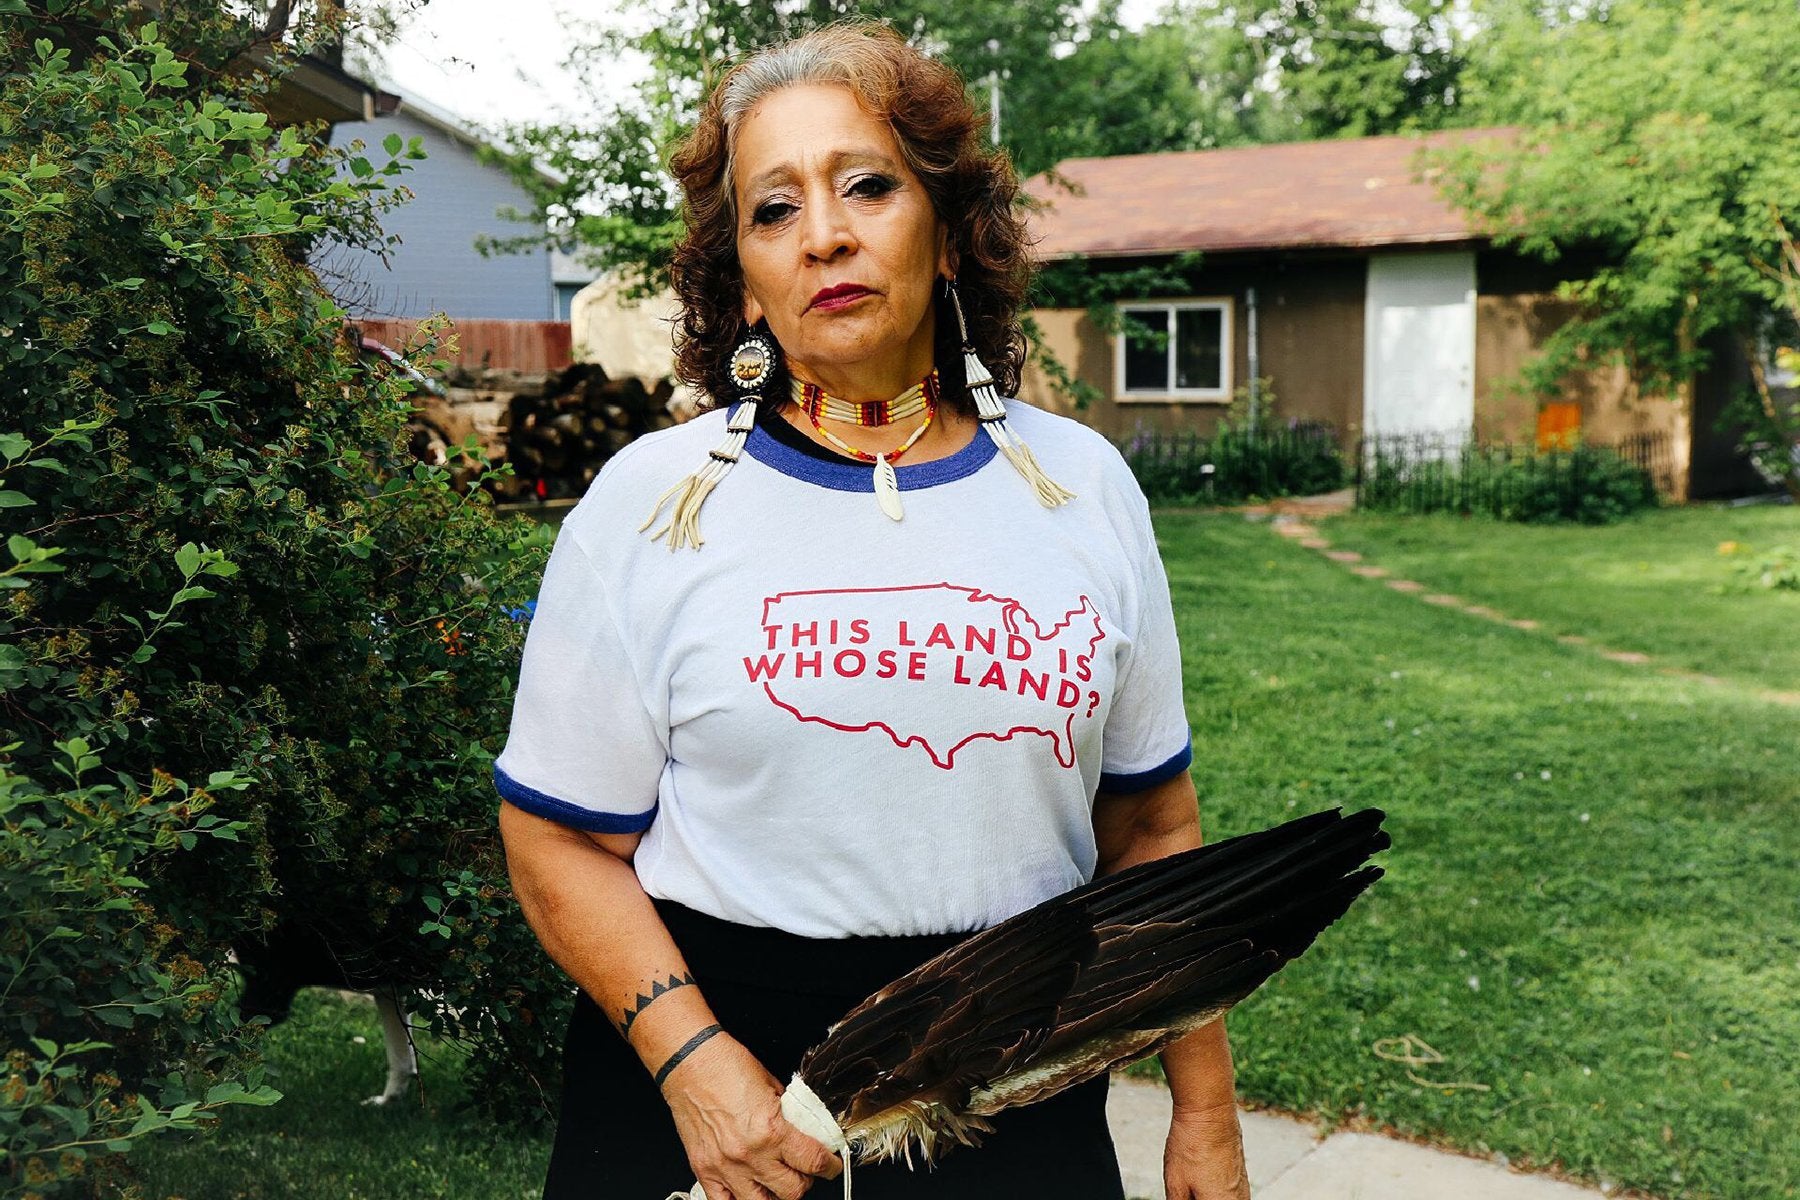 An Indigenous woman stands in a yard wearing a shirt that reads, "This land is whose land?"